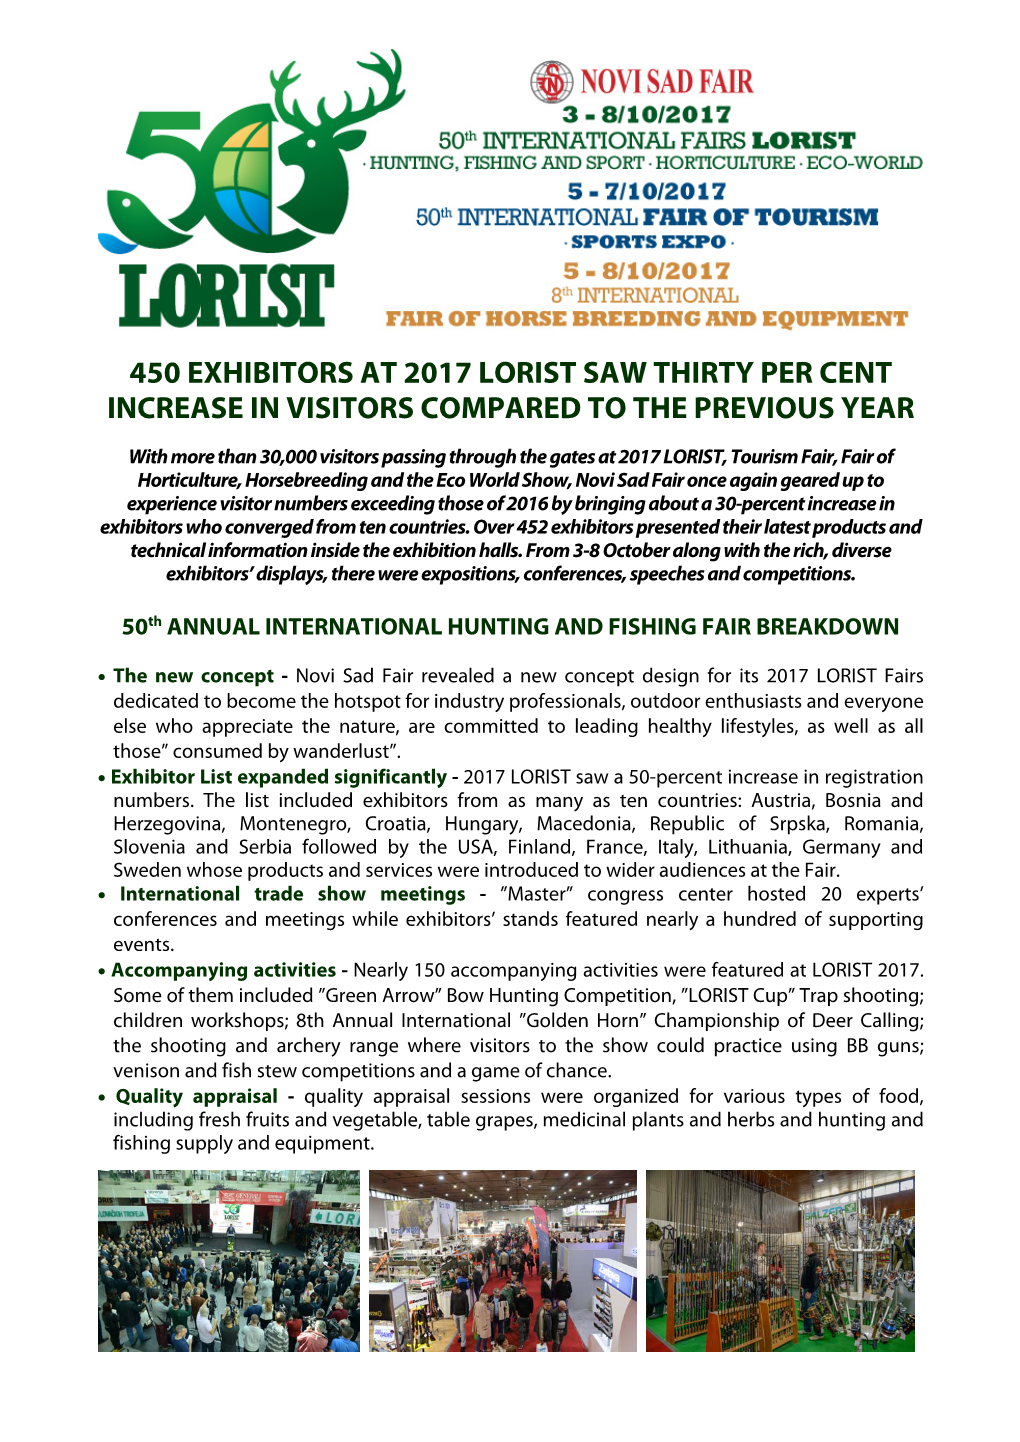 450 Exhibitors at 2017 Lorist Saw Thirty Per Cent Increase in Visitors Compared to the Previous Year